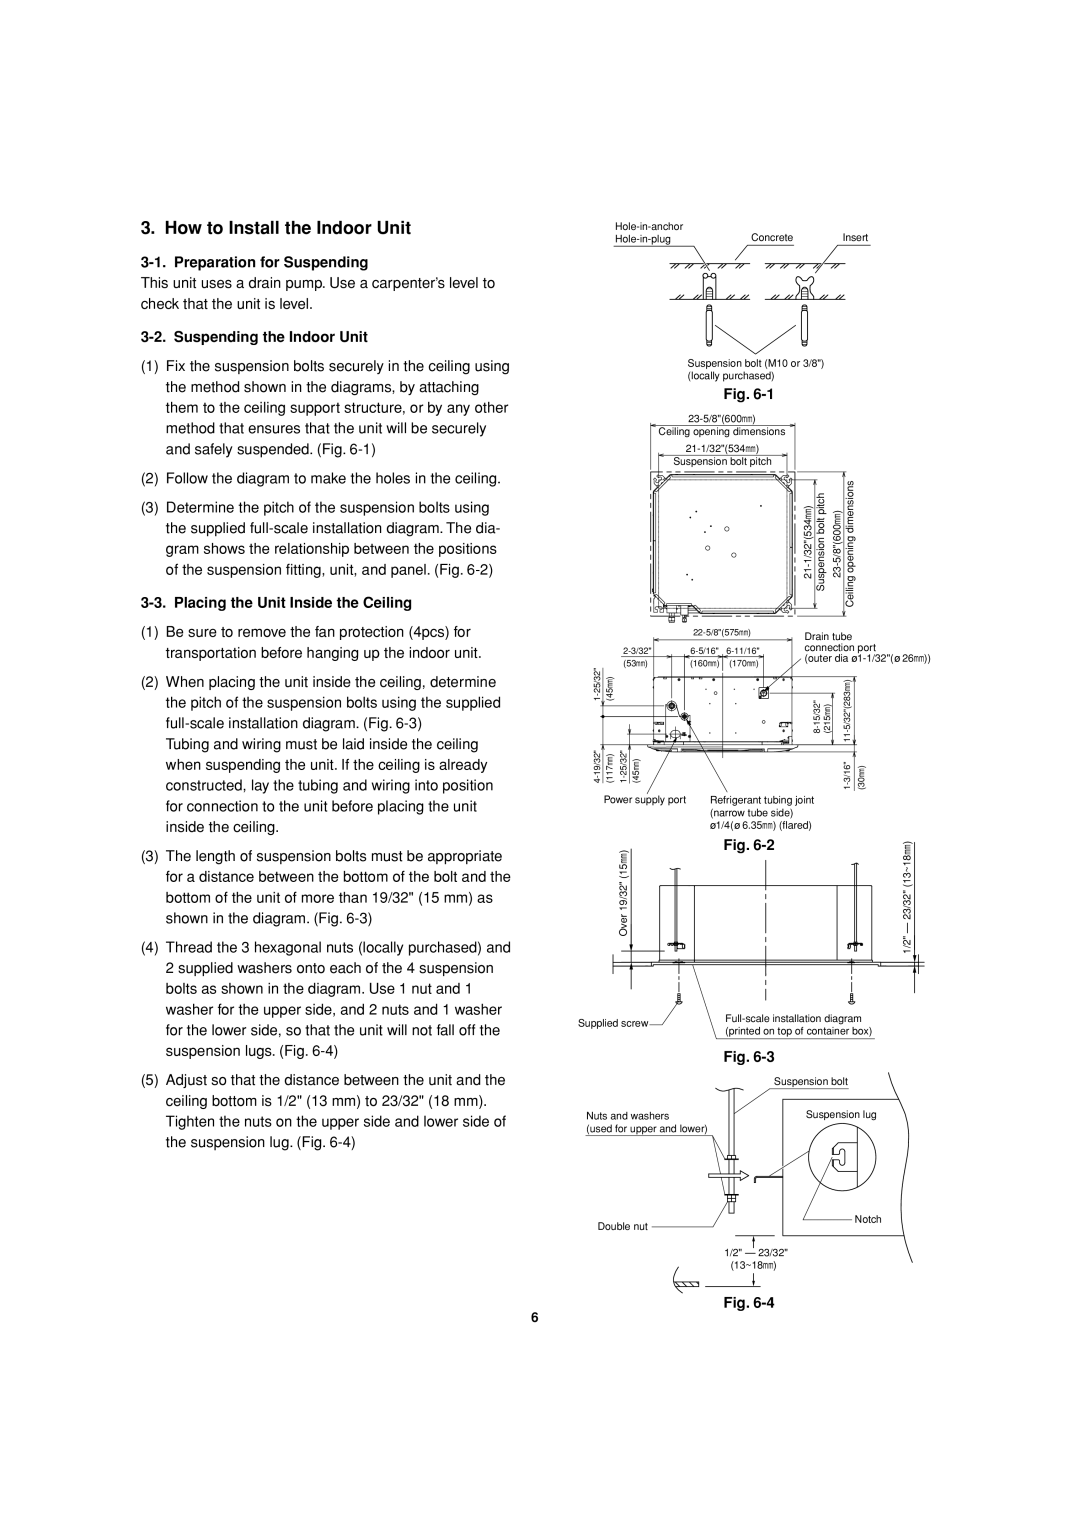 Sanyo XMHS1272, XMHS0972 How to Install the Indoor Unit, Preparation for Suspending, Suspending the Indoor Unit, Fig 